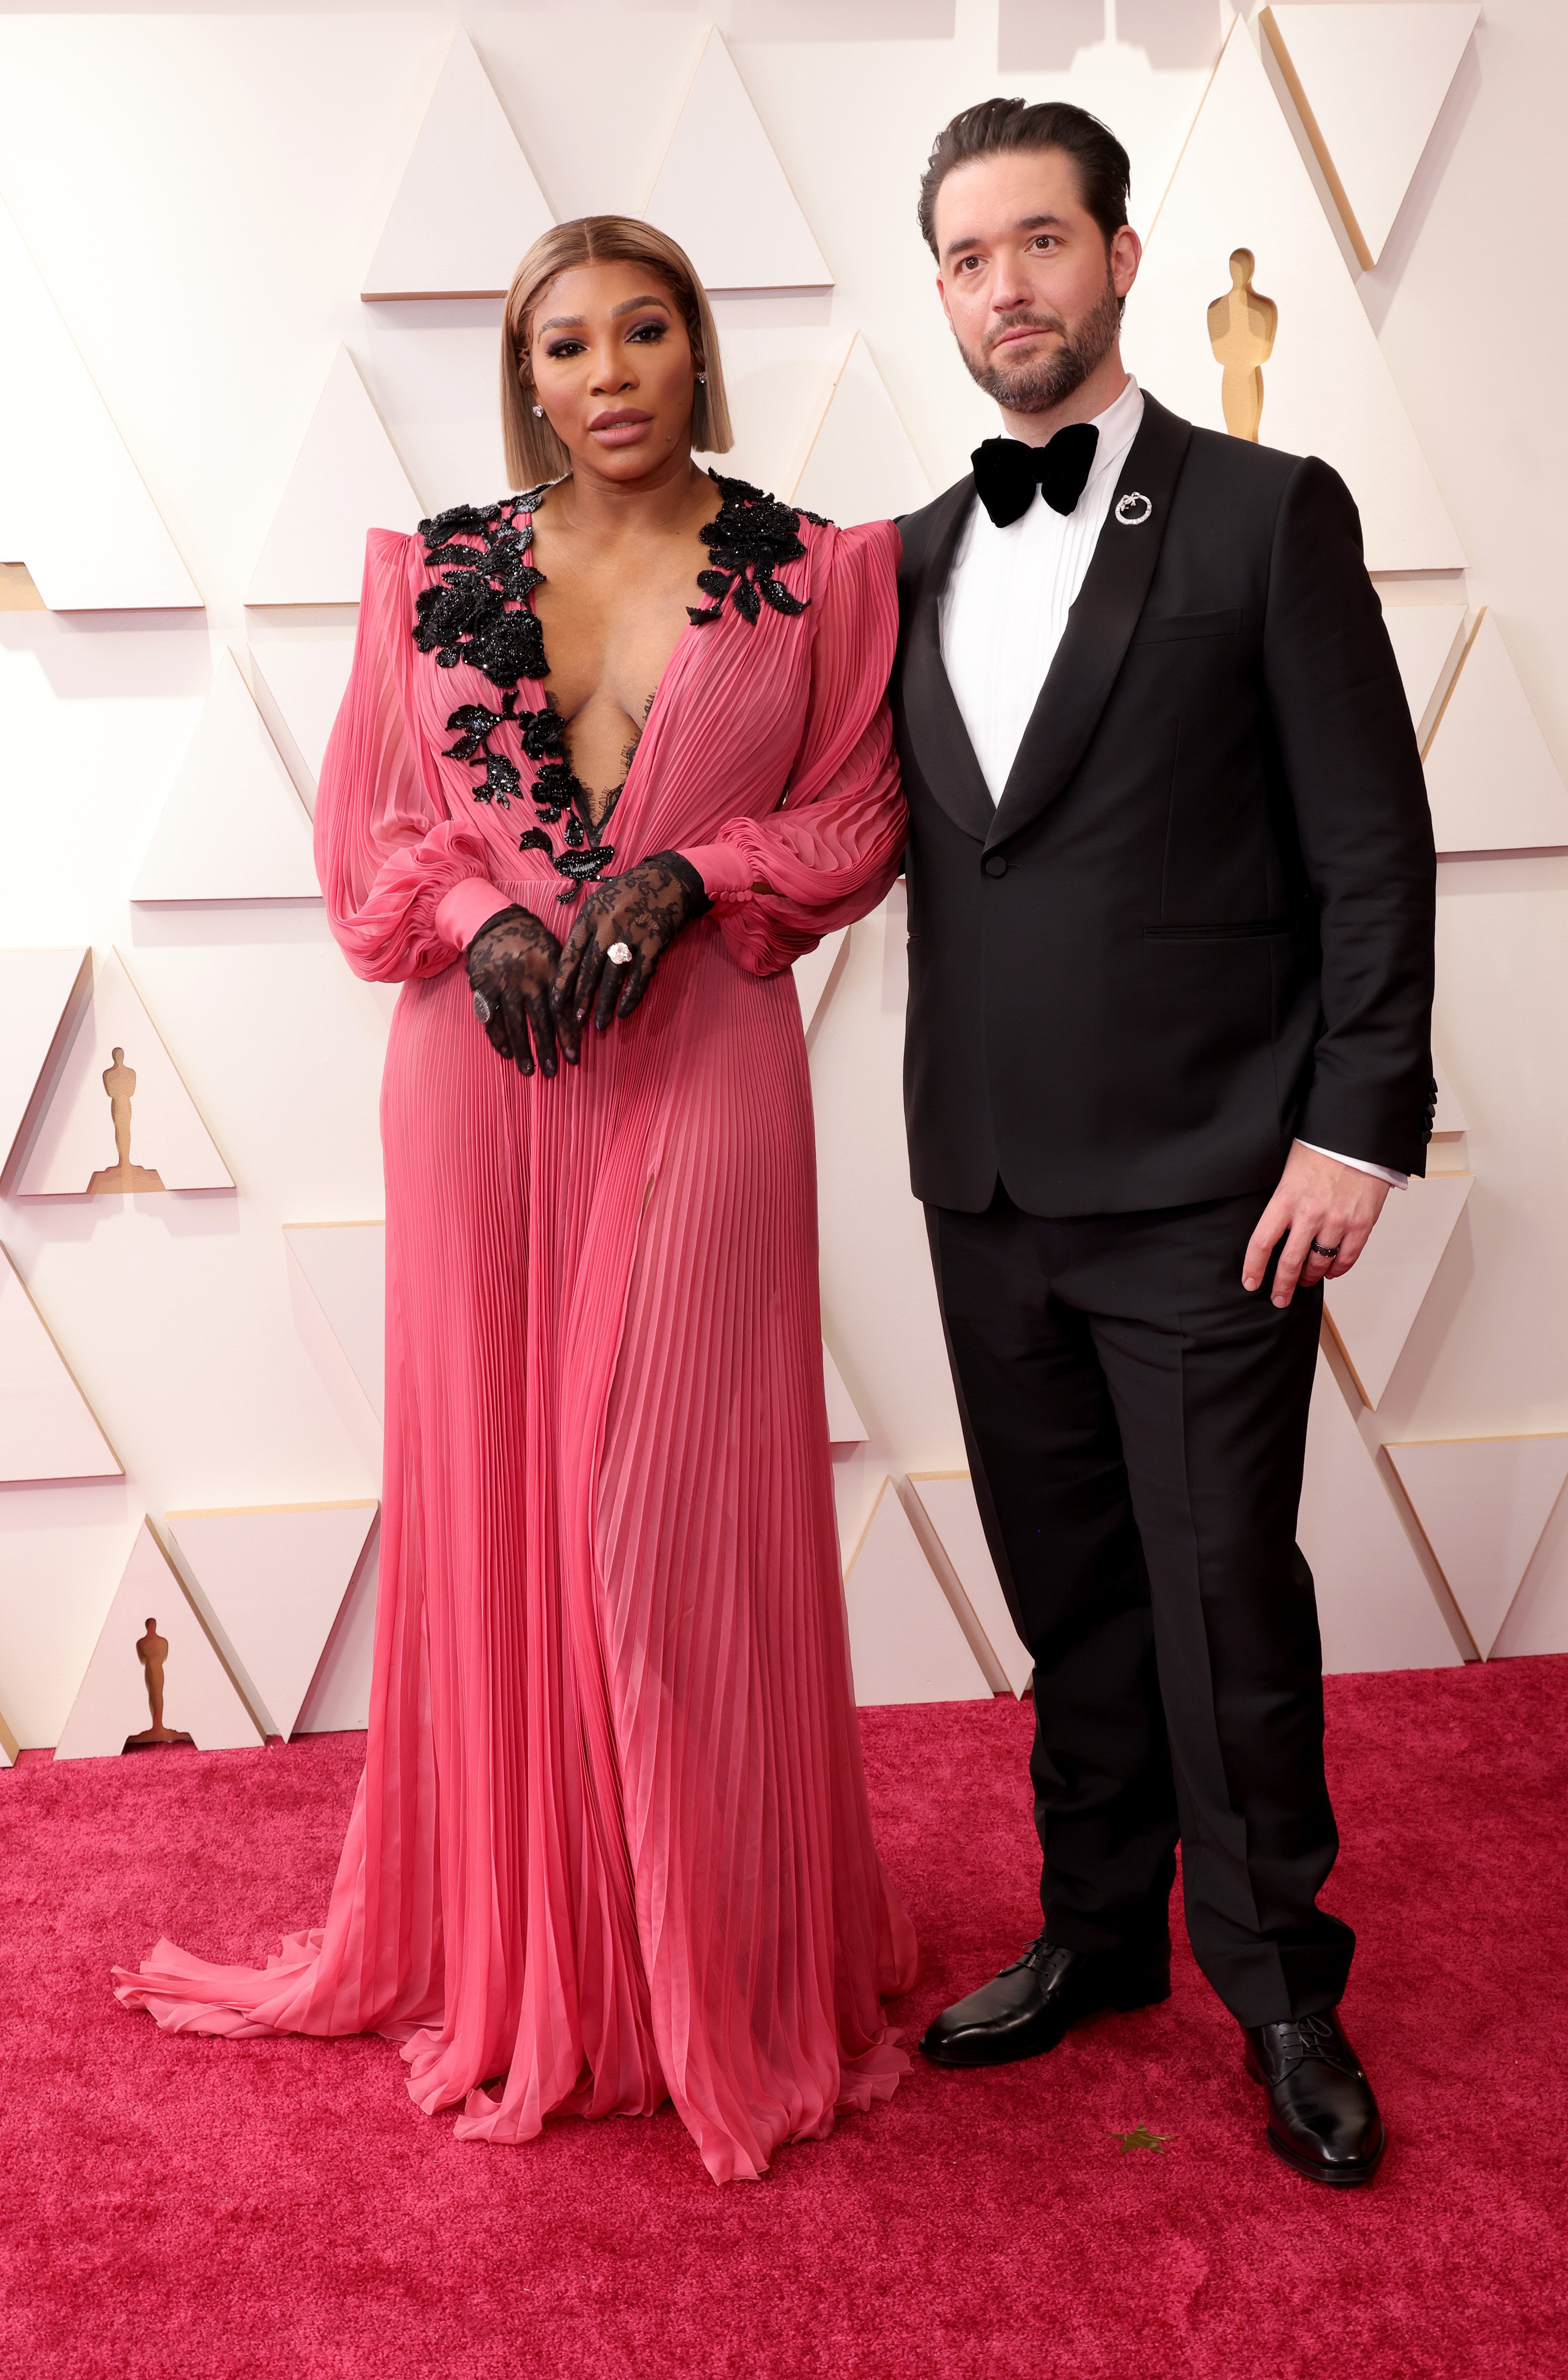 Serena Williams and Alexis Ohanian attend the 94th Annual Academy Awards at Hollywood and Highland on March 27, 2022, in Hollywood, California. | Source: Getty Images